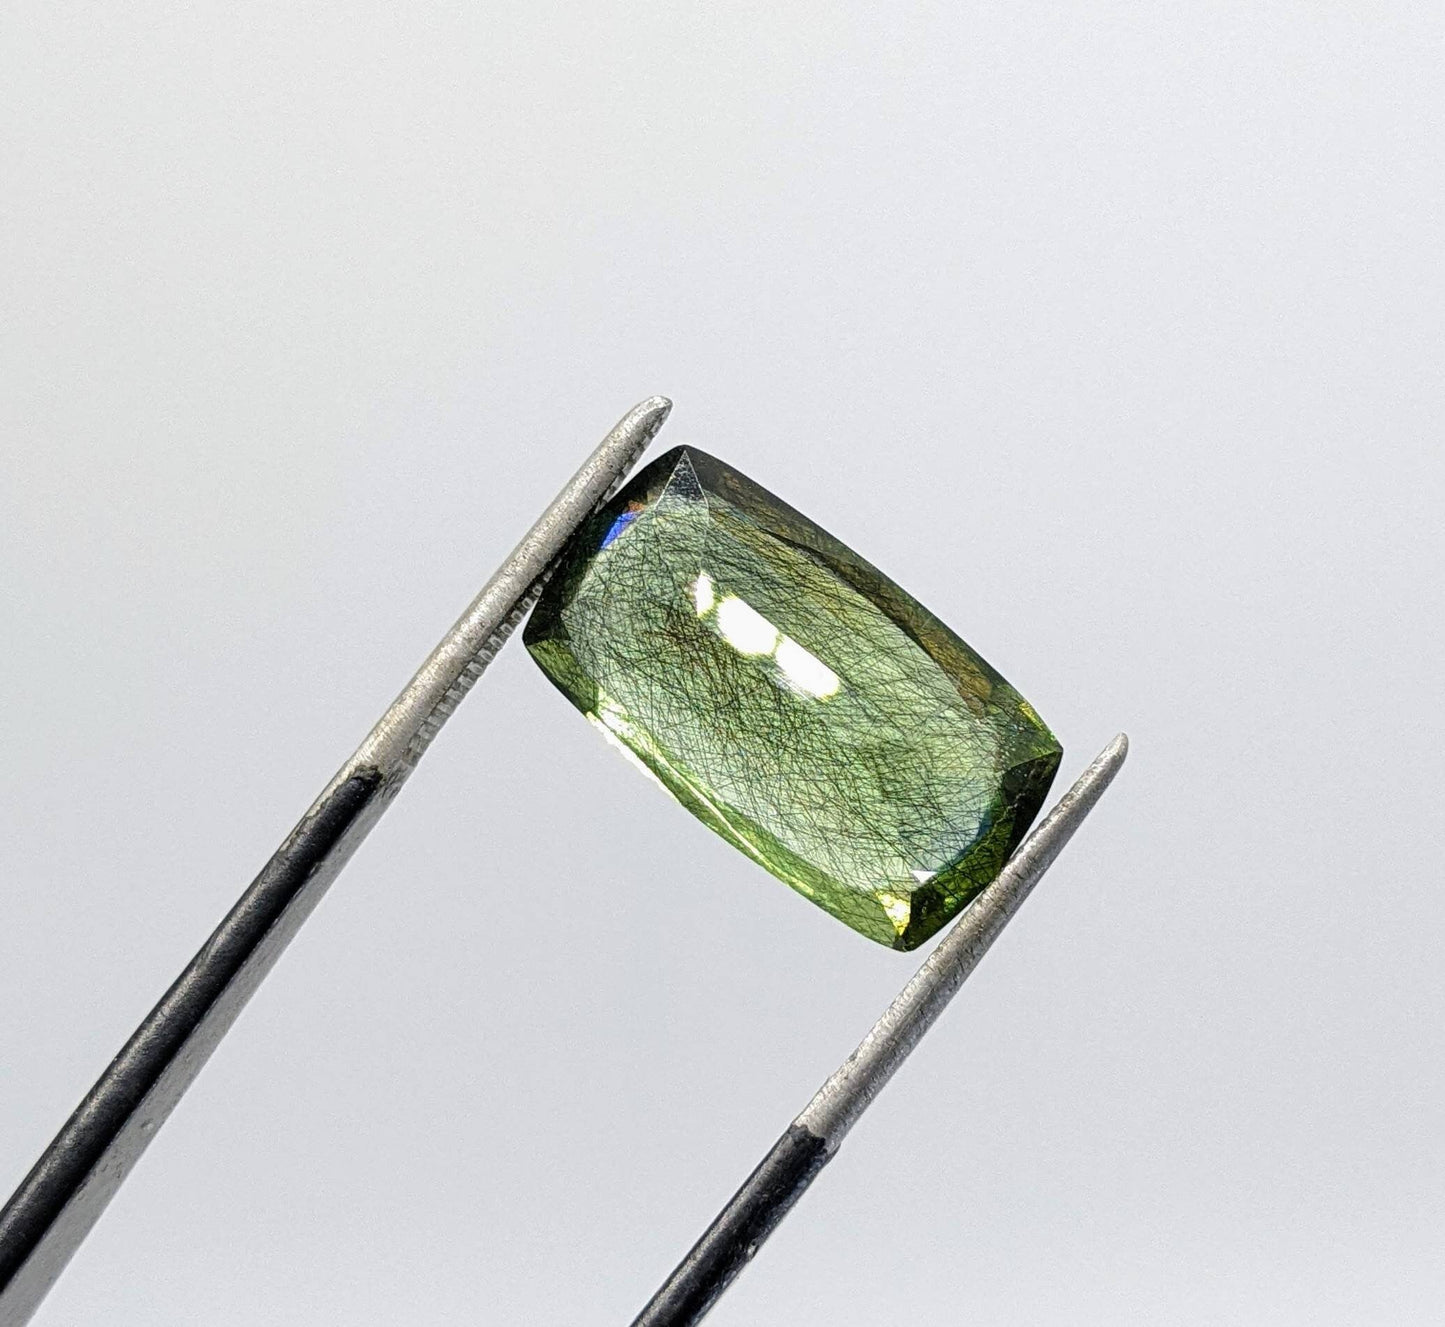 ARSAA GEMS AND MINERALSRutile peridot Gem Peridot containing hairlike inclusions Ludwigite from Mansehra KP Pakistan, 8.5 carats - Premium  from ARSAA GEMS AND MINERALS - Just $185.00! Shop now at ARSAA GEMS AND MINERALS